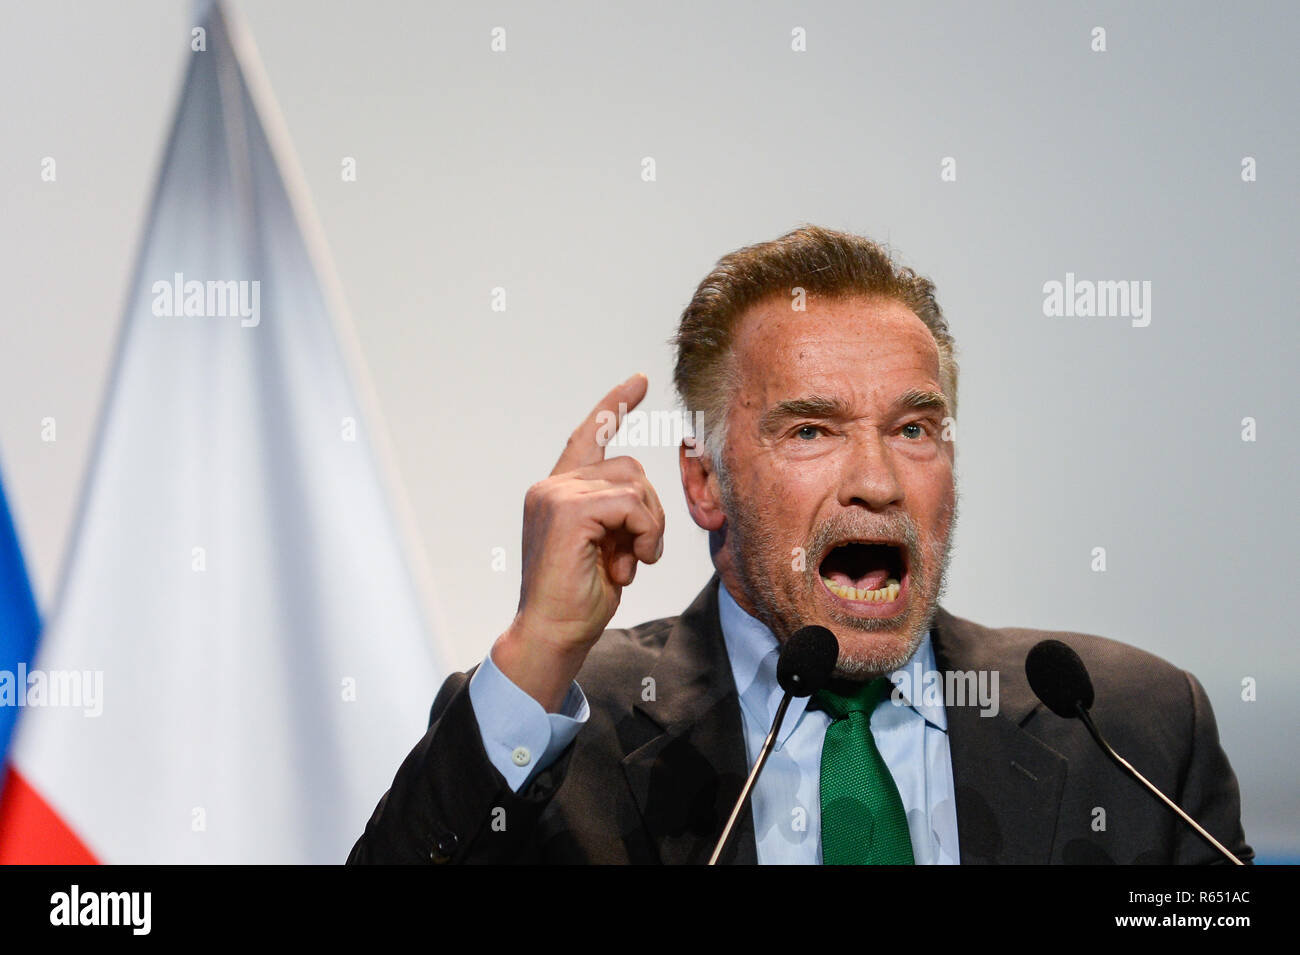 Austrian-American actor and former governor of California, Arnold Schwarzenegger seen speaking during the ceremonial conference opening of the COP24 UN Climate Change Conference 2018. Stock Photo